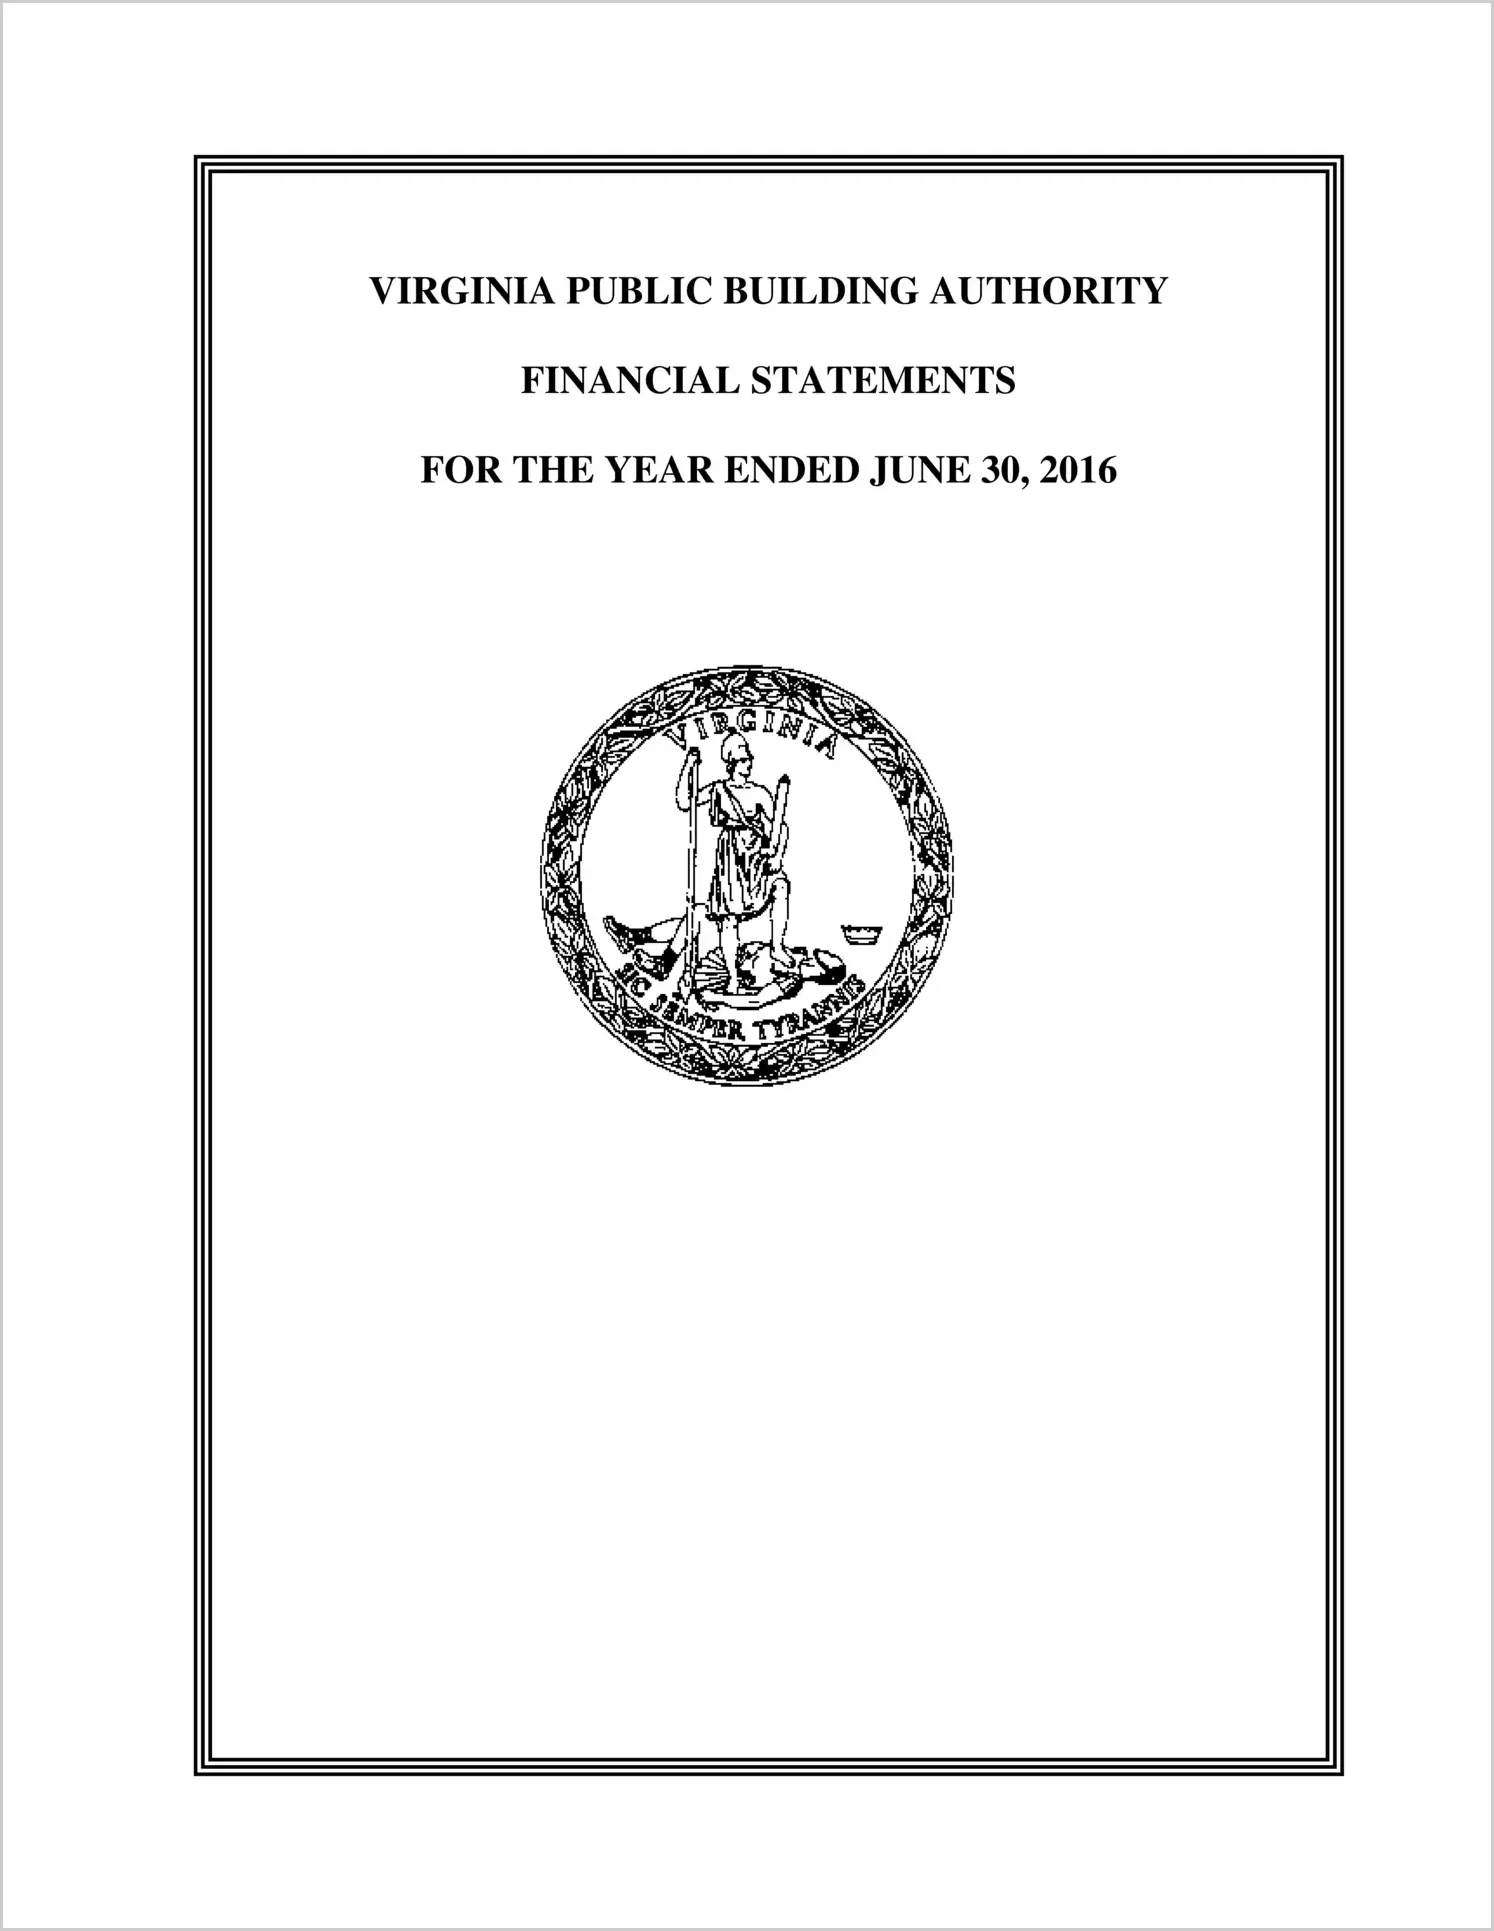 Virginia Public Building Authority Financial Statements for year Ended June 30, 2016